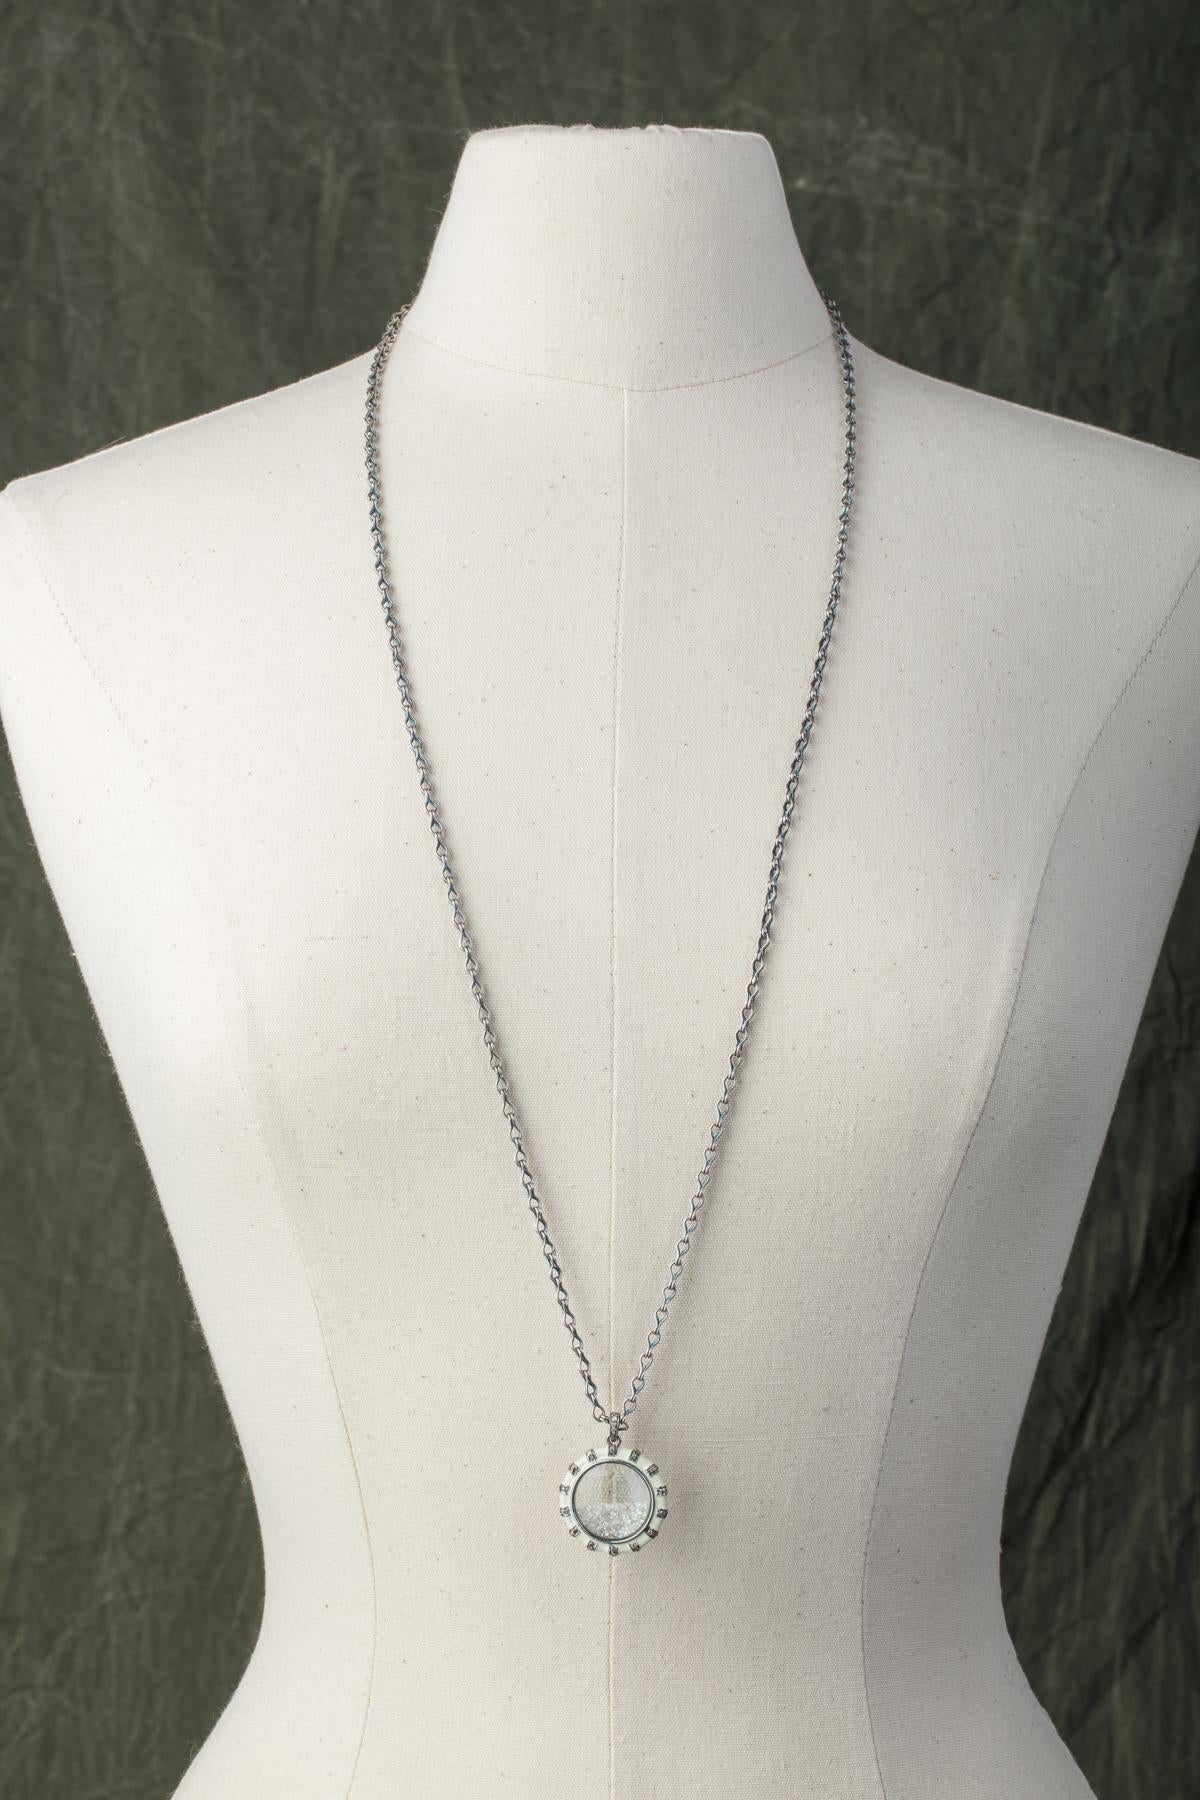 Two-sided, white enamel pendant with inset diamonds and faceted, loose diamonds in the picture frame beveled glass.  Hangs from a hand-made sterling silver chain.  Could be worn short or long. Carat weight of diamonds is 3.34.